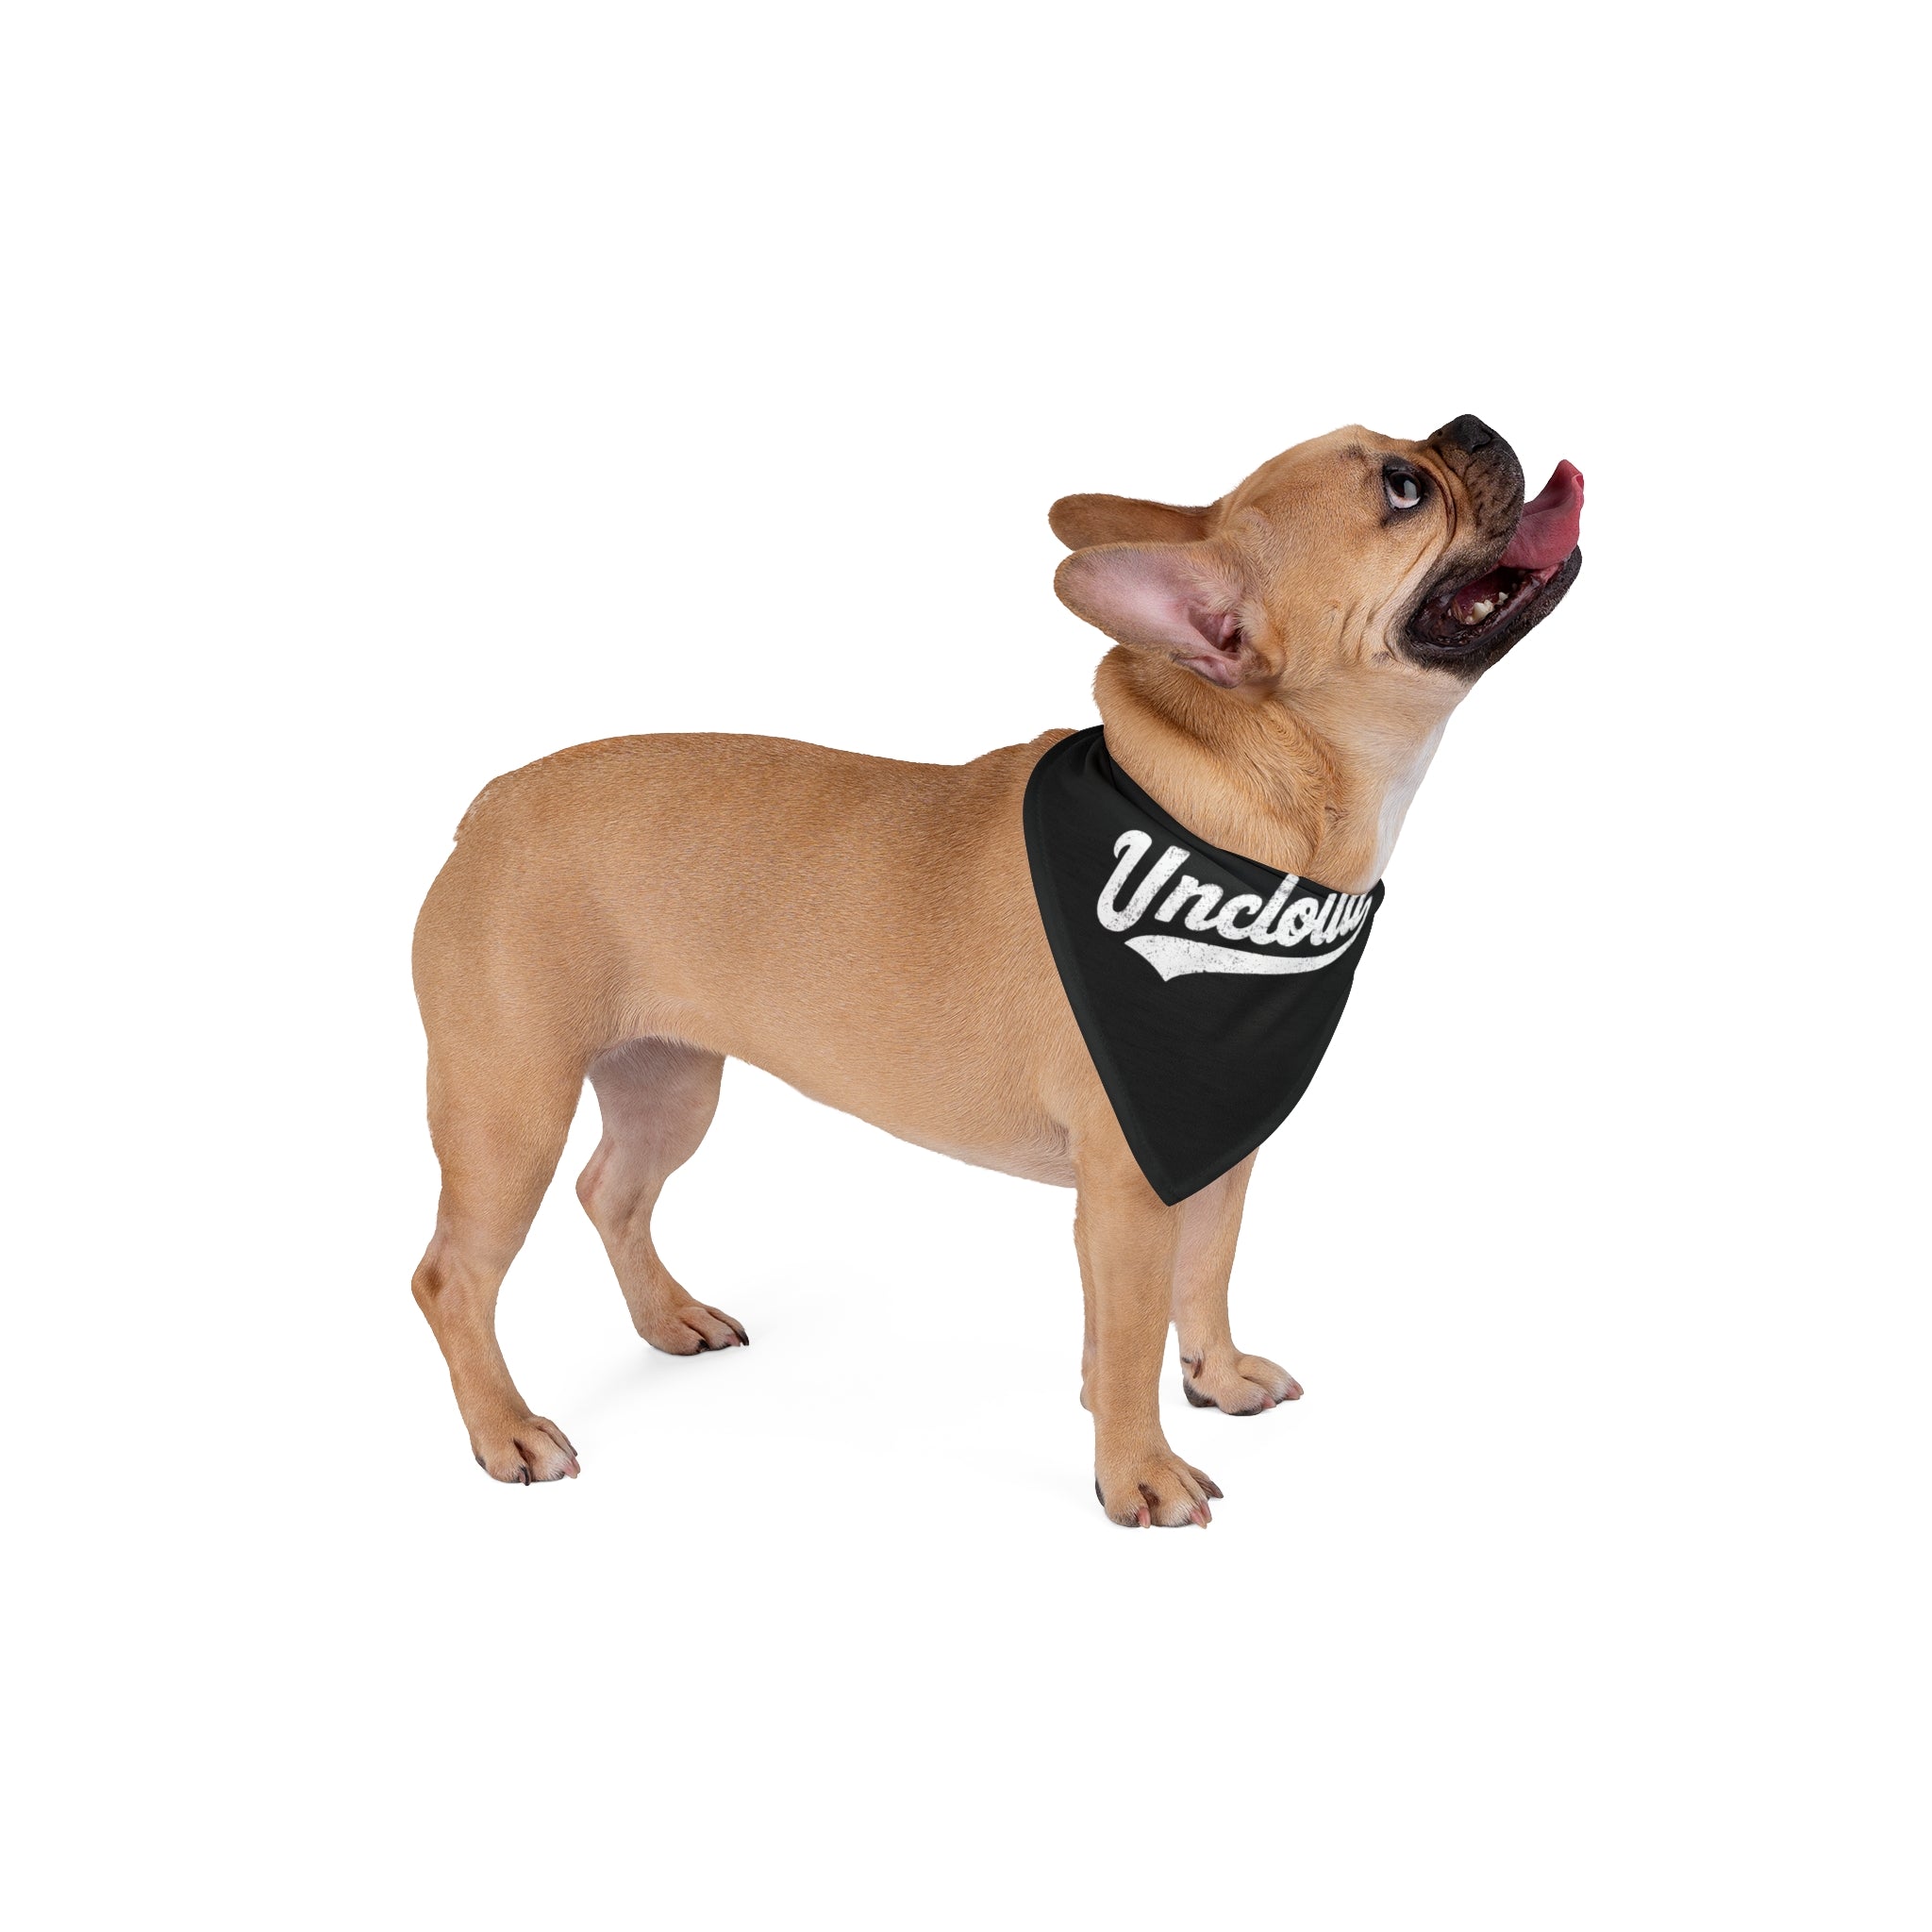 A tan French Bulldog wearing a black Uncloud - Pet Bandana made of soft-spun polyester with the word "Unclouded" looks upward with its tongue out, enjoying the comfort and skin protection it provides.